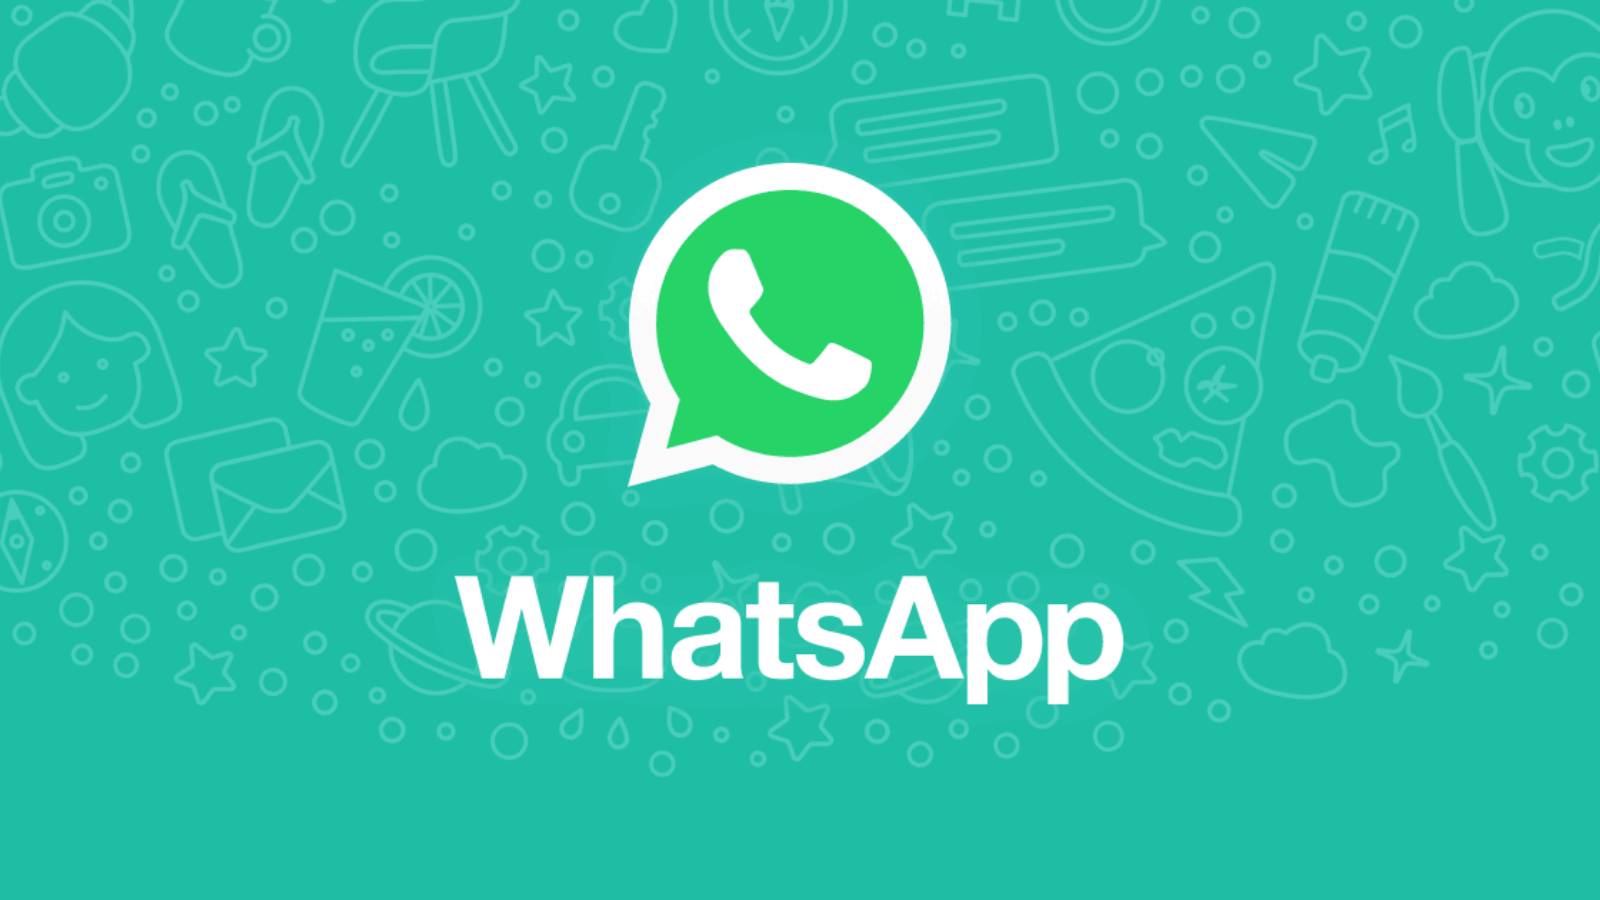 WhatsApp makes HUGE SECRET Android iPhone Change